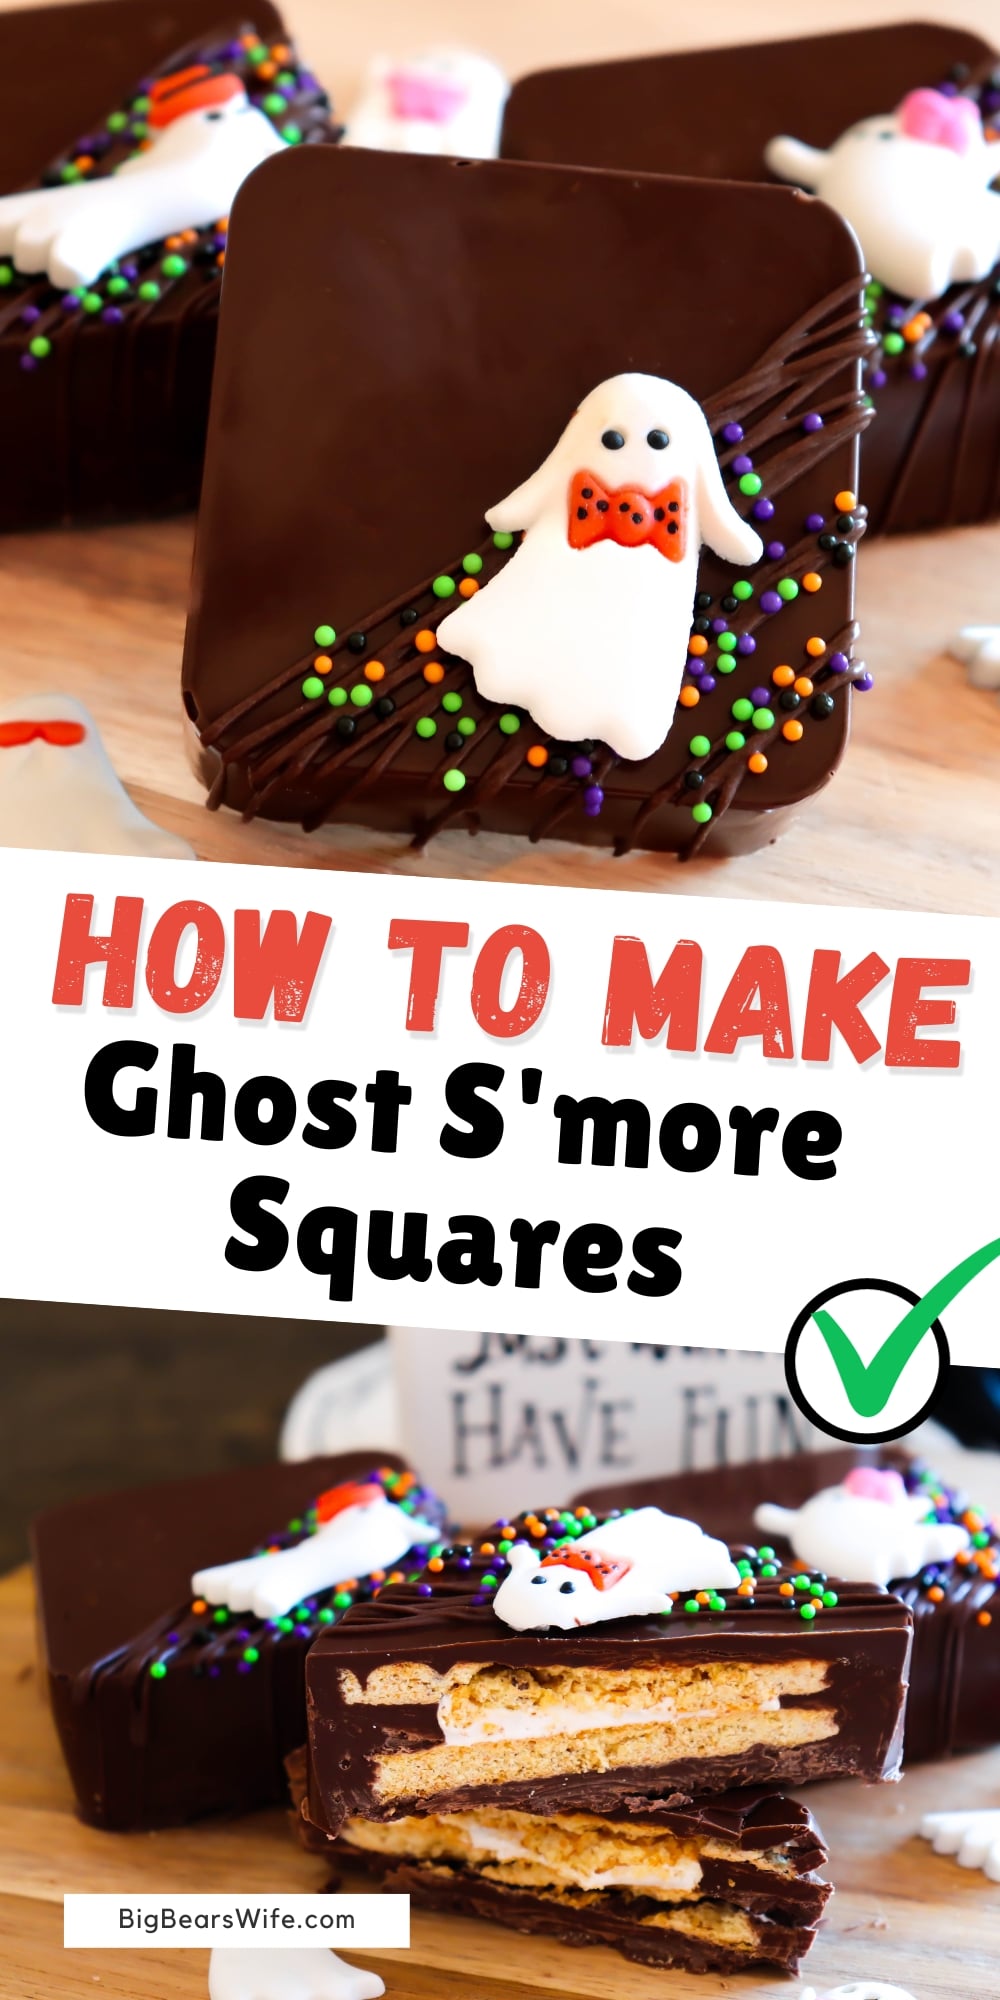 These Ghost S'more Squares are super cute and pretty easy to make! You've got your graham cracker, marshmallow and chocolate all packed together with a cute ghost on top.  via @bigbearswife